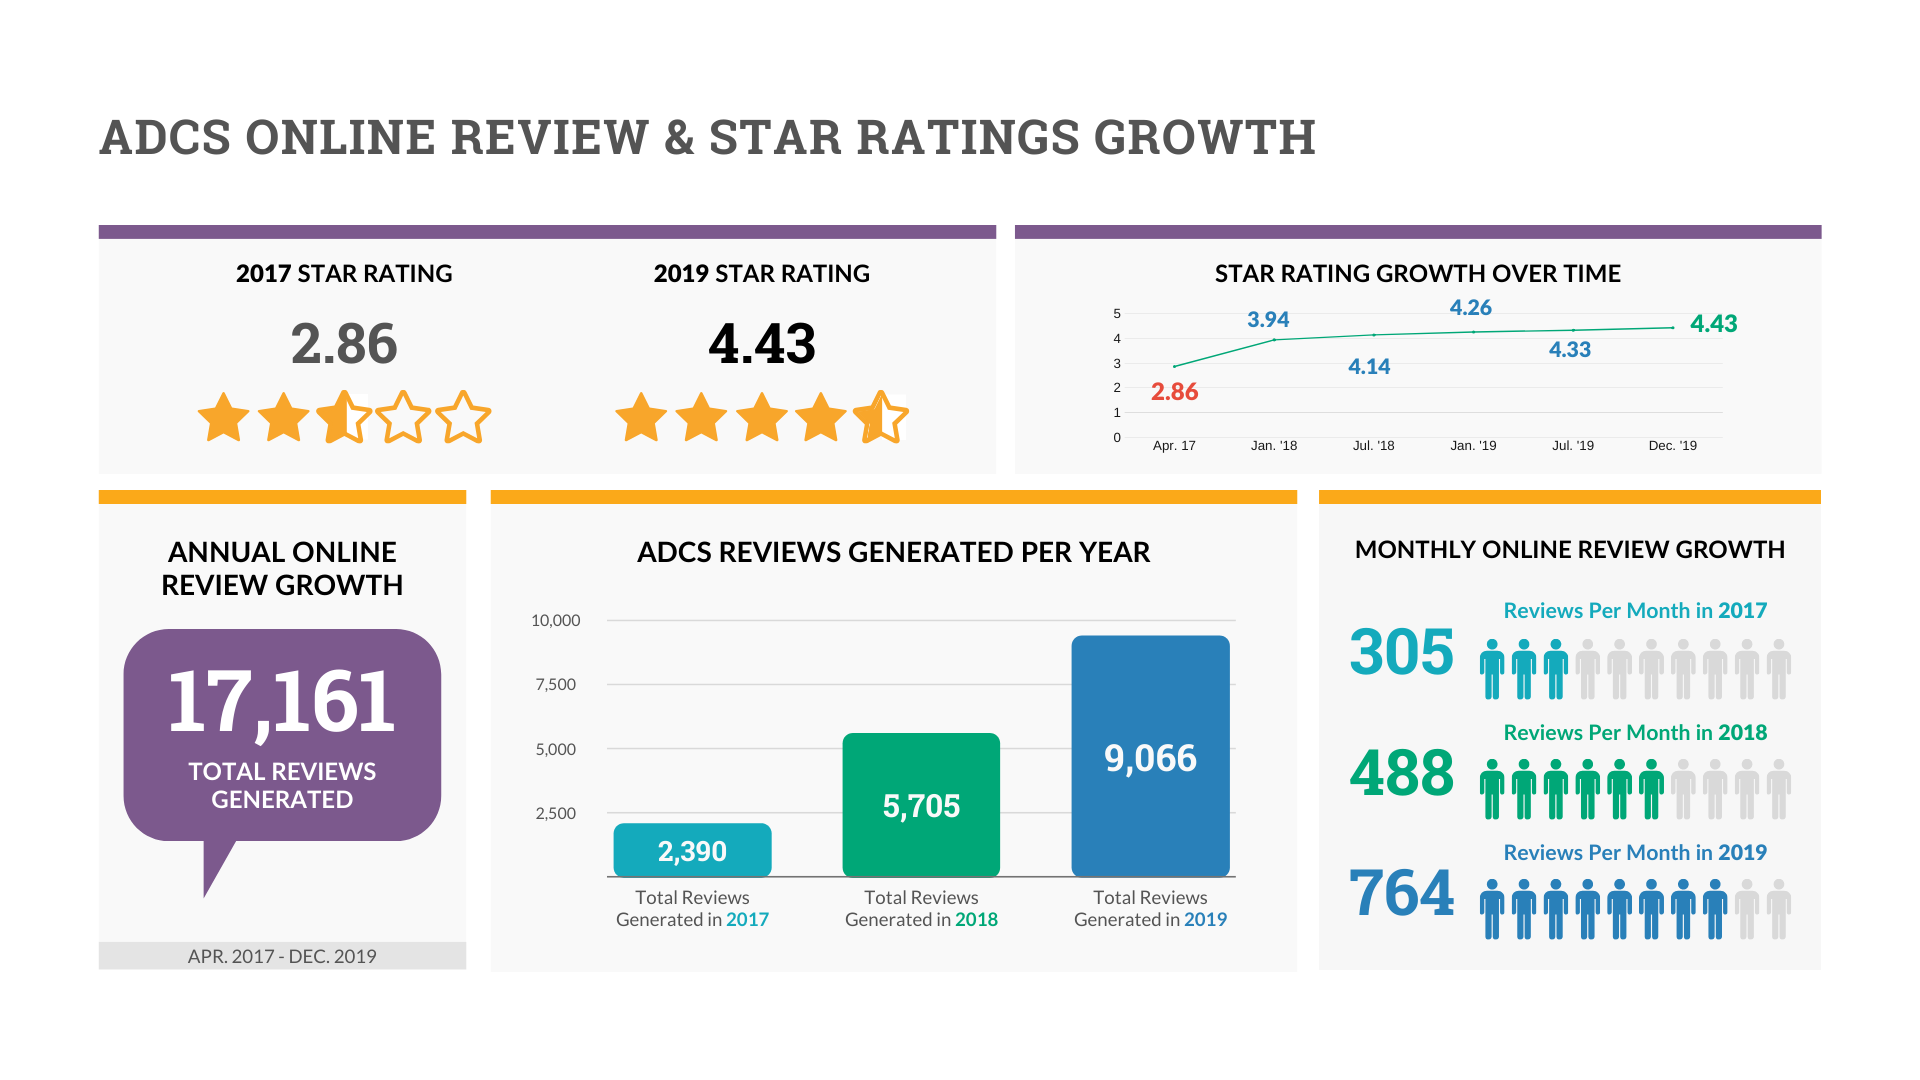 ADCS Review Volume & Star Rating